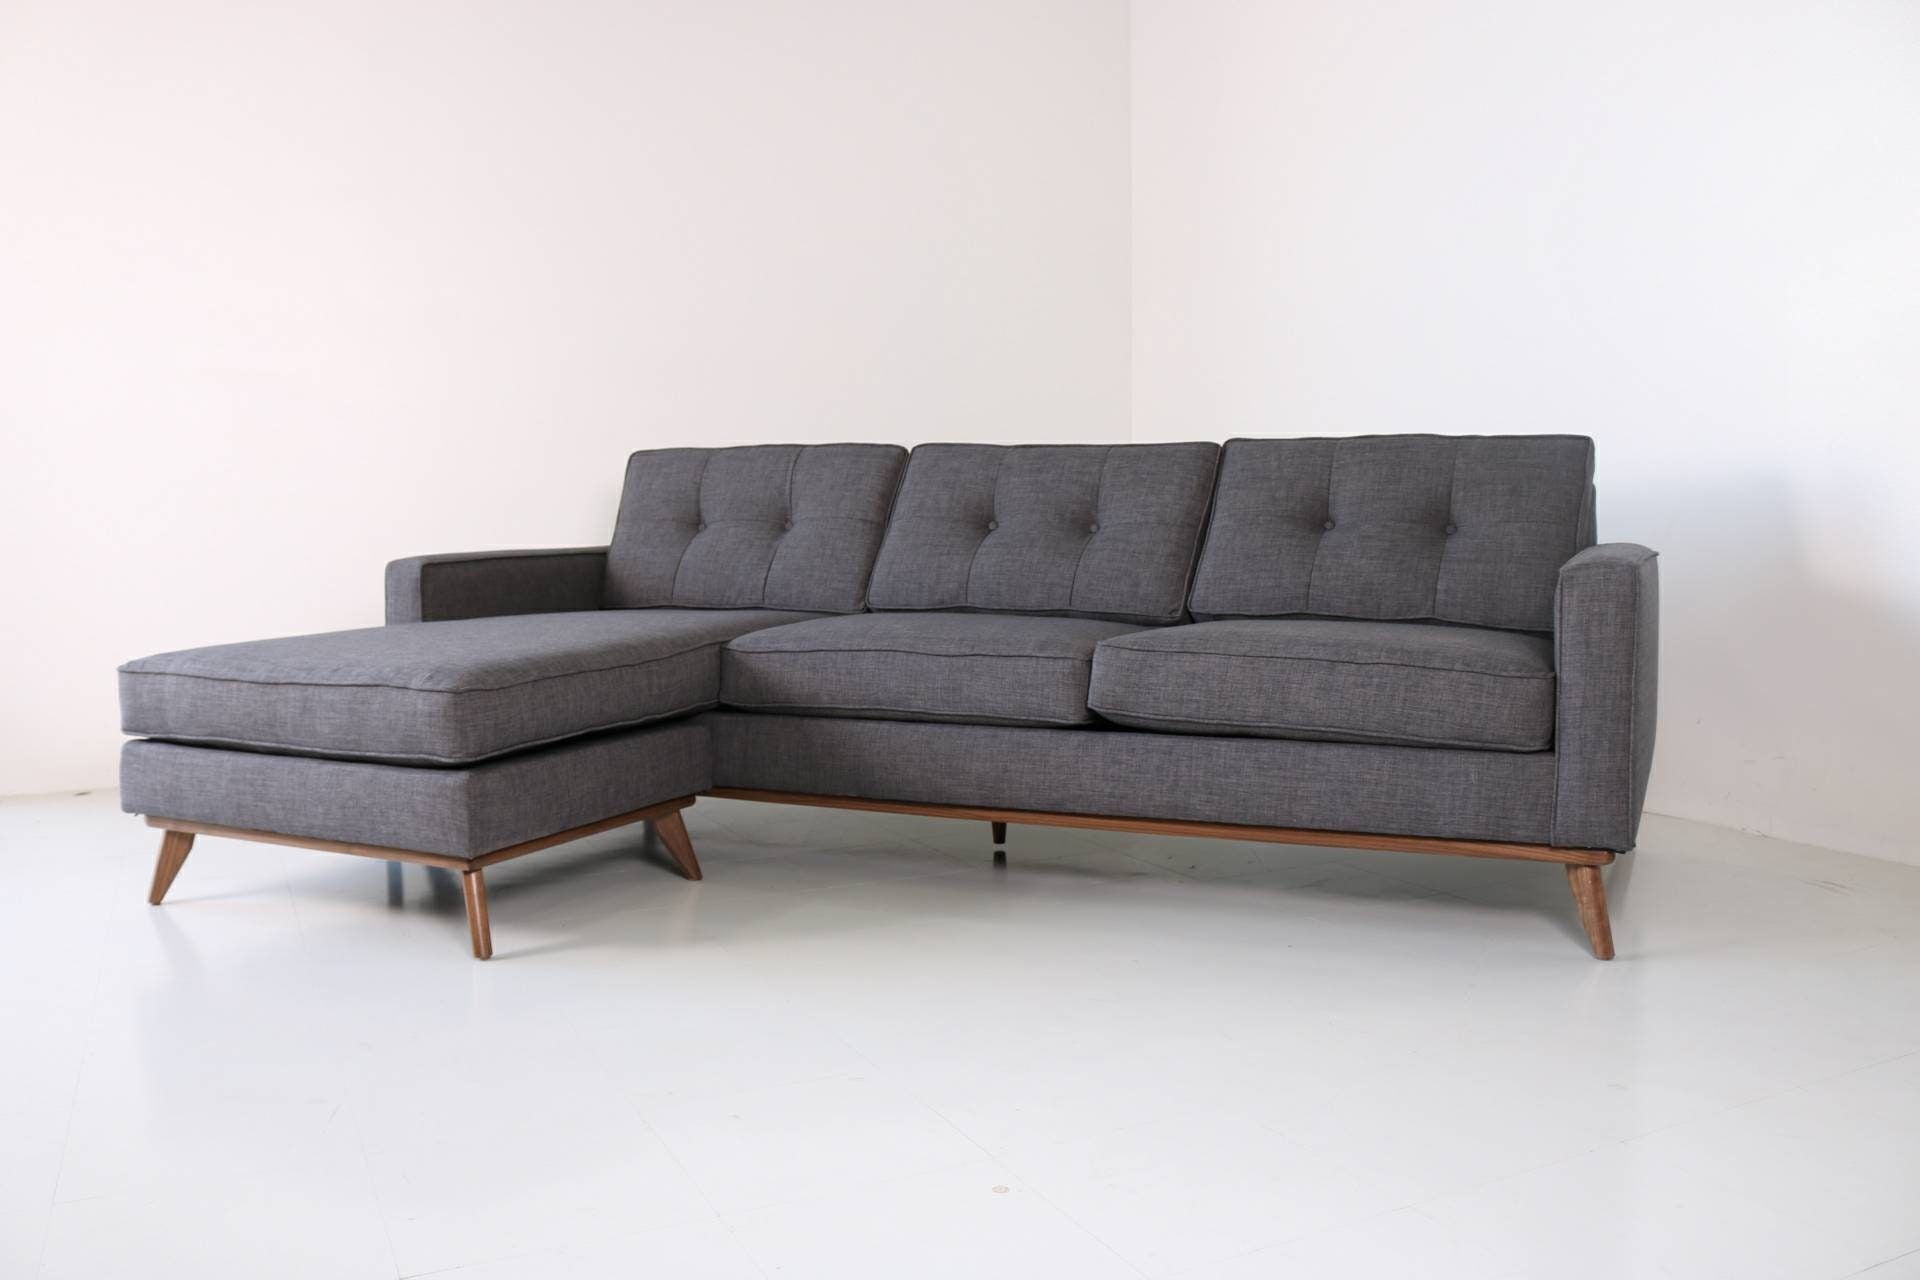 Mid Century Modern Danish Sofa Sectional Chaise Reversible Regarding Alani Mid Century Modern Sectional Sofas With Chaise (View 7 of 15)